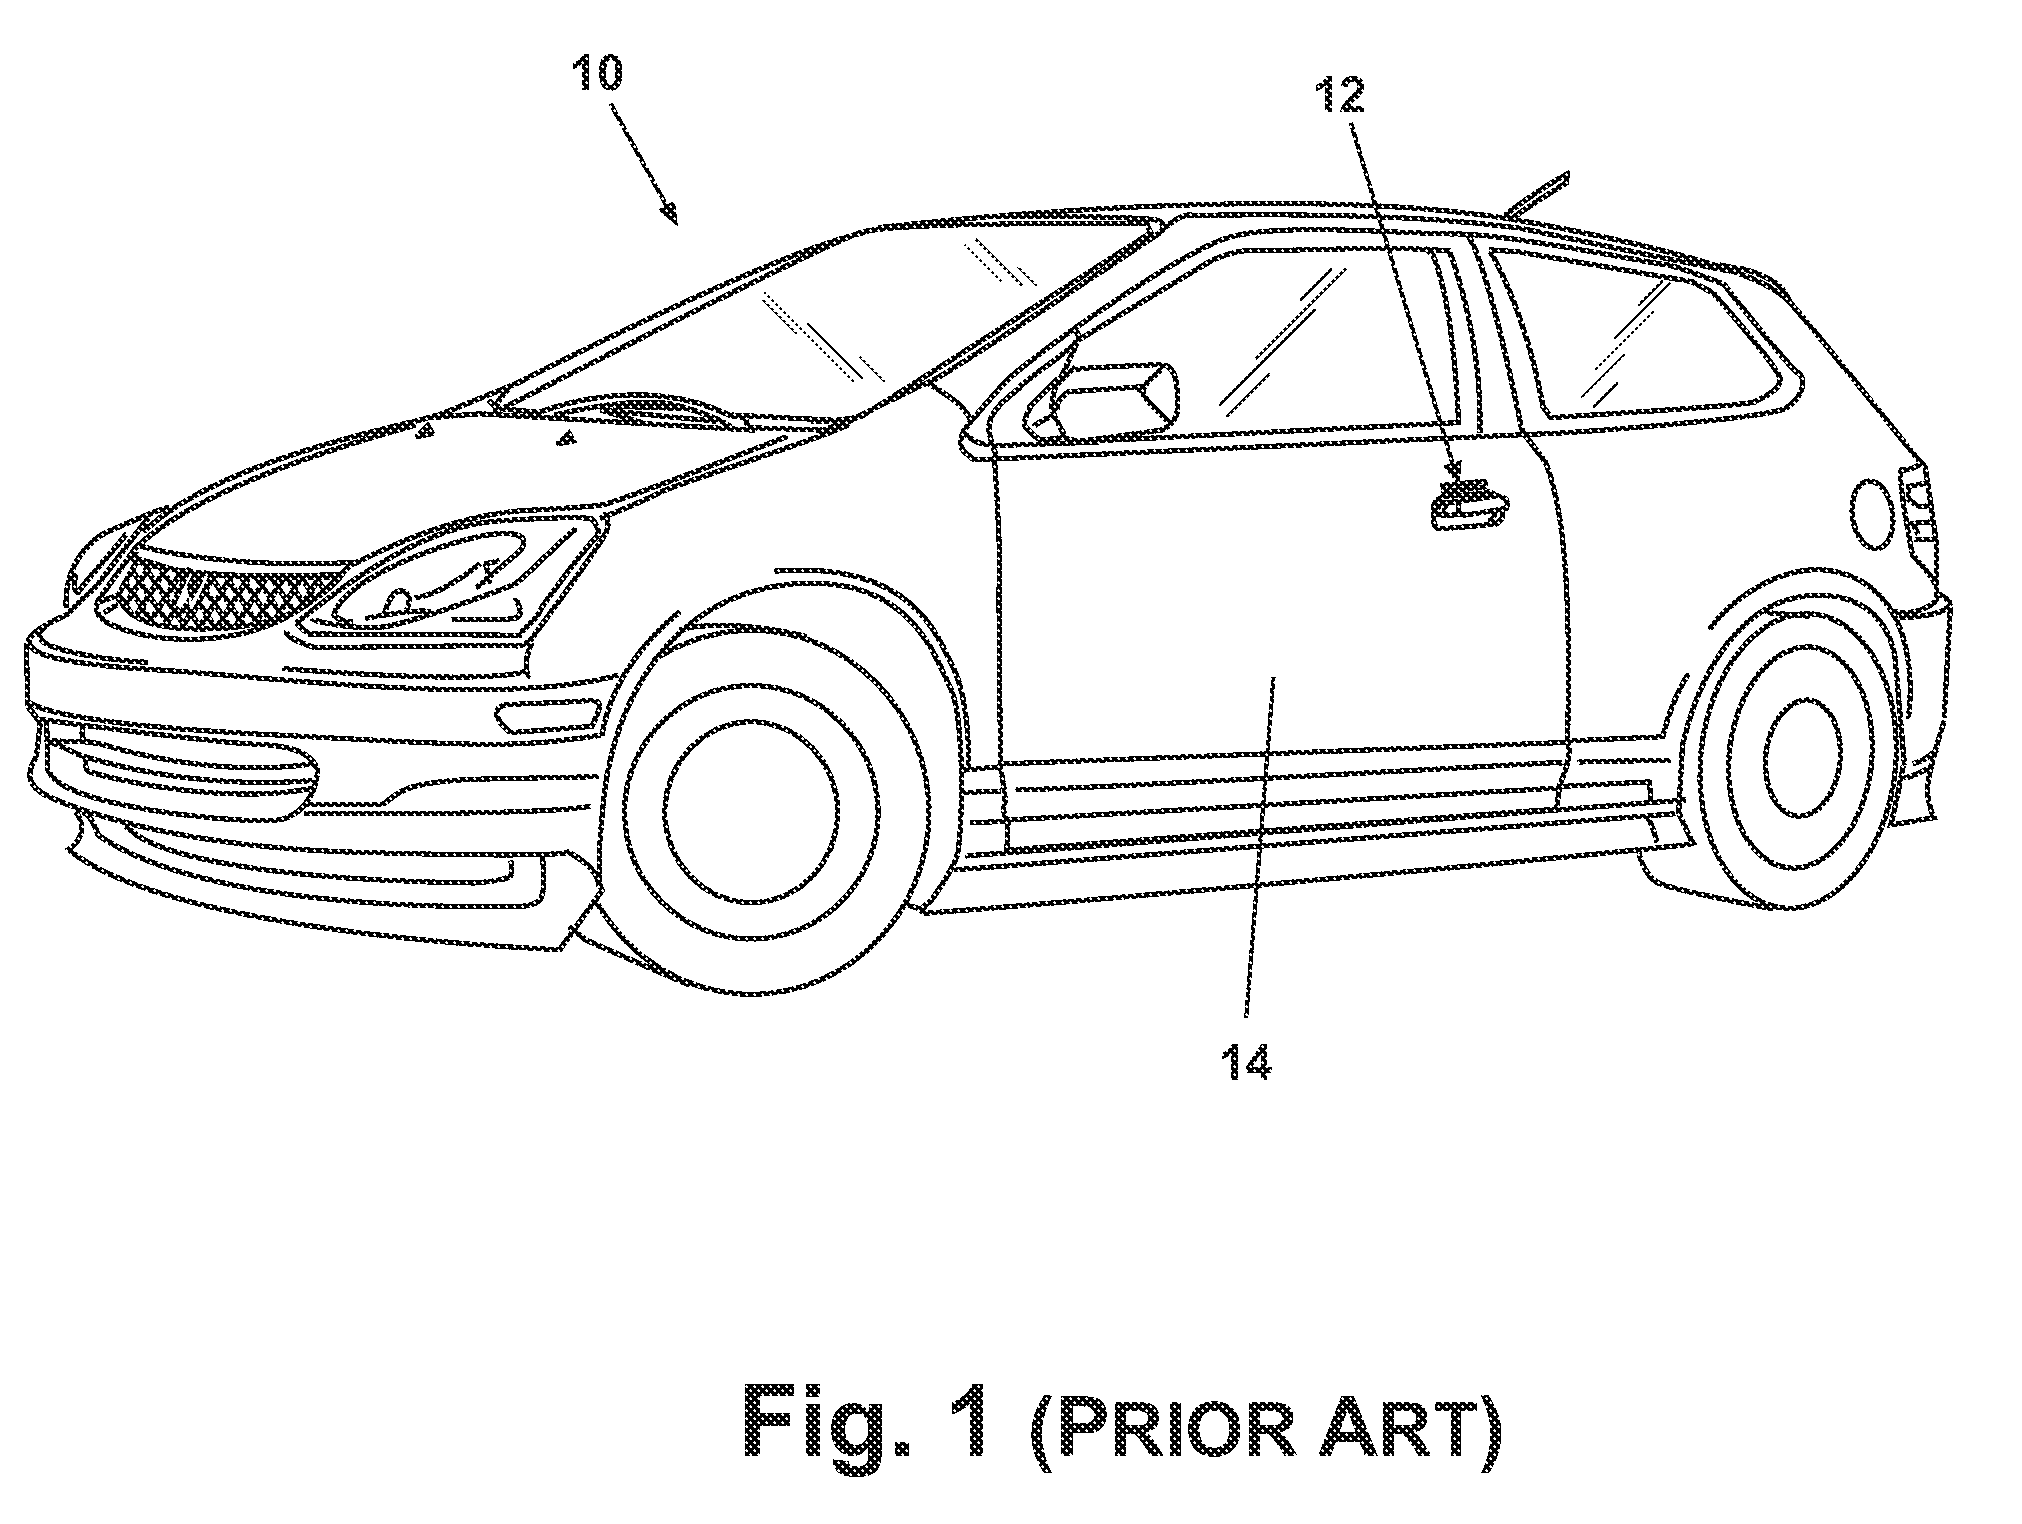 Keyless entry system incorporating concealable keypad